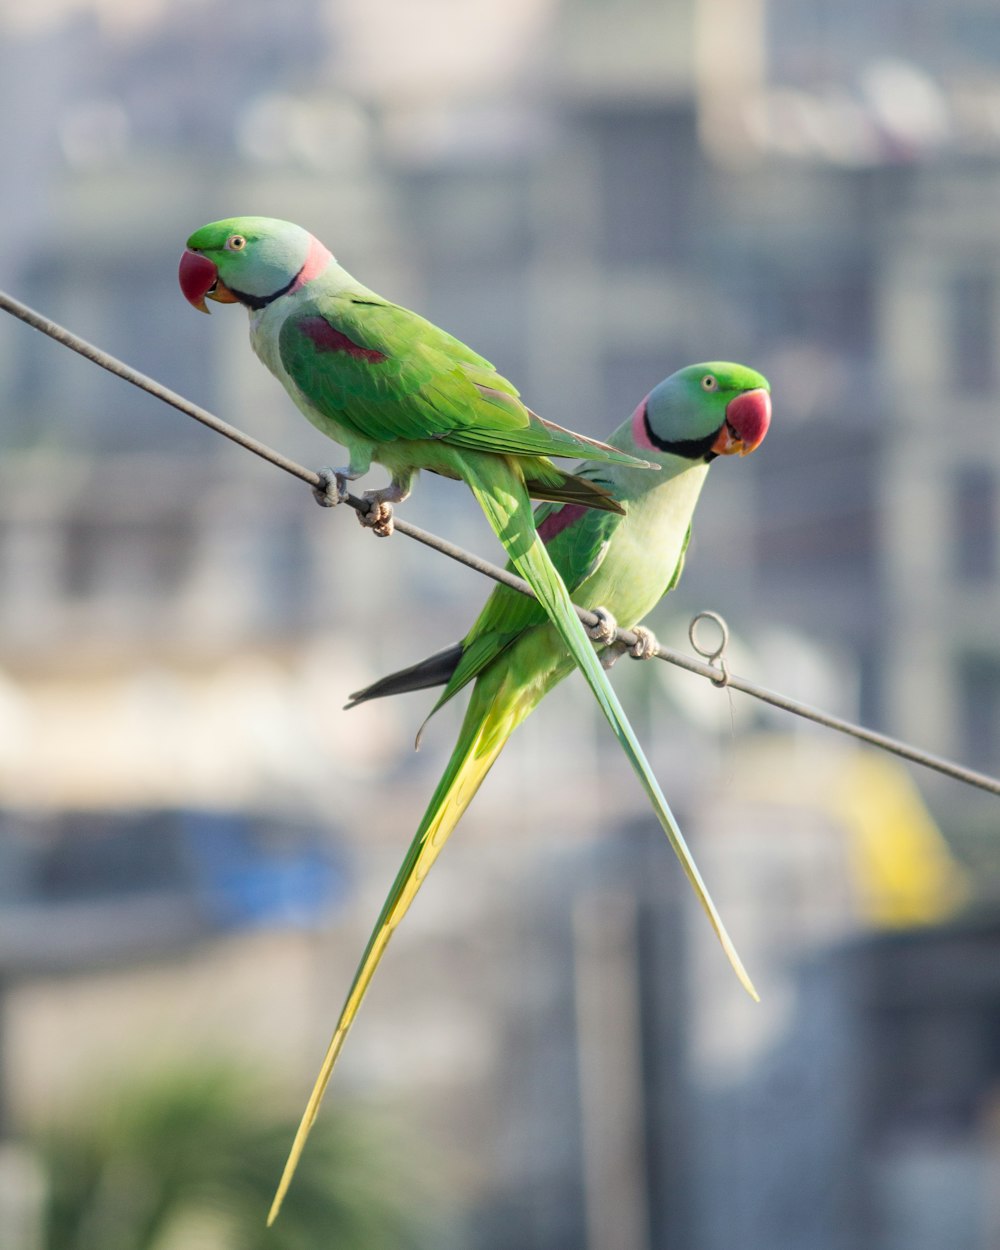 two green parrots sitting on a wire with buildings in the background